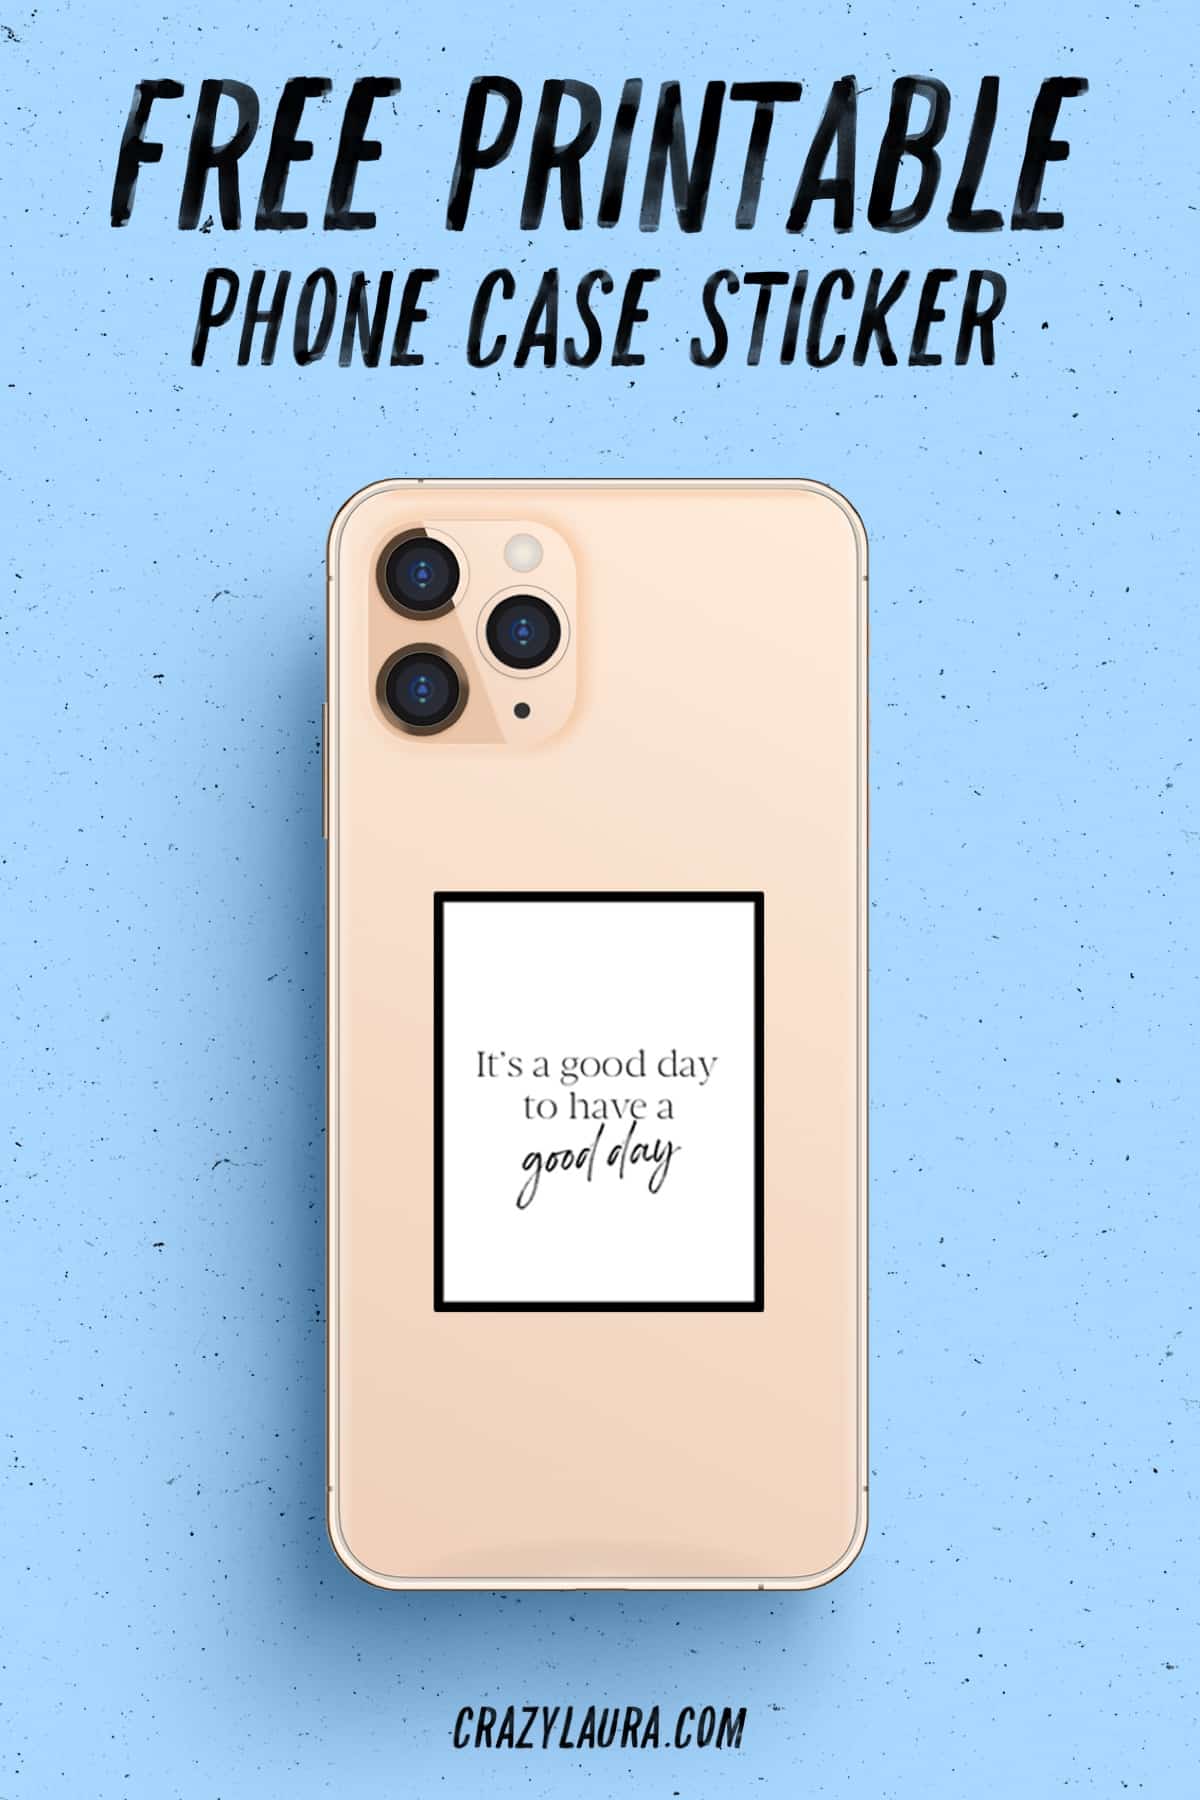 iphone sticker printable for free